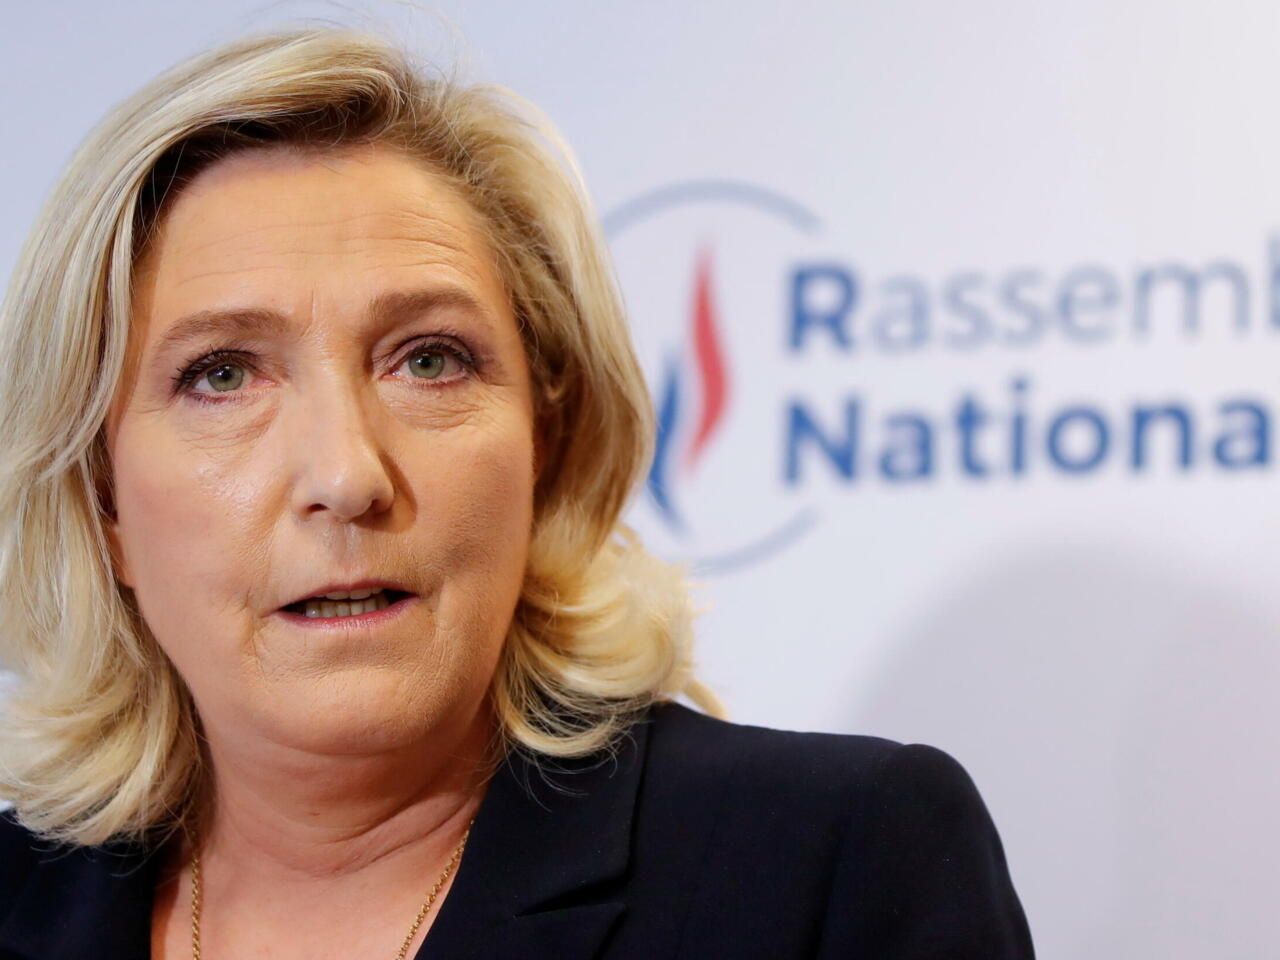 Le Pen accuses French government of fraud